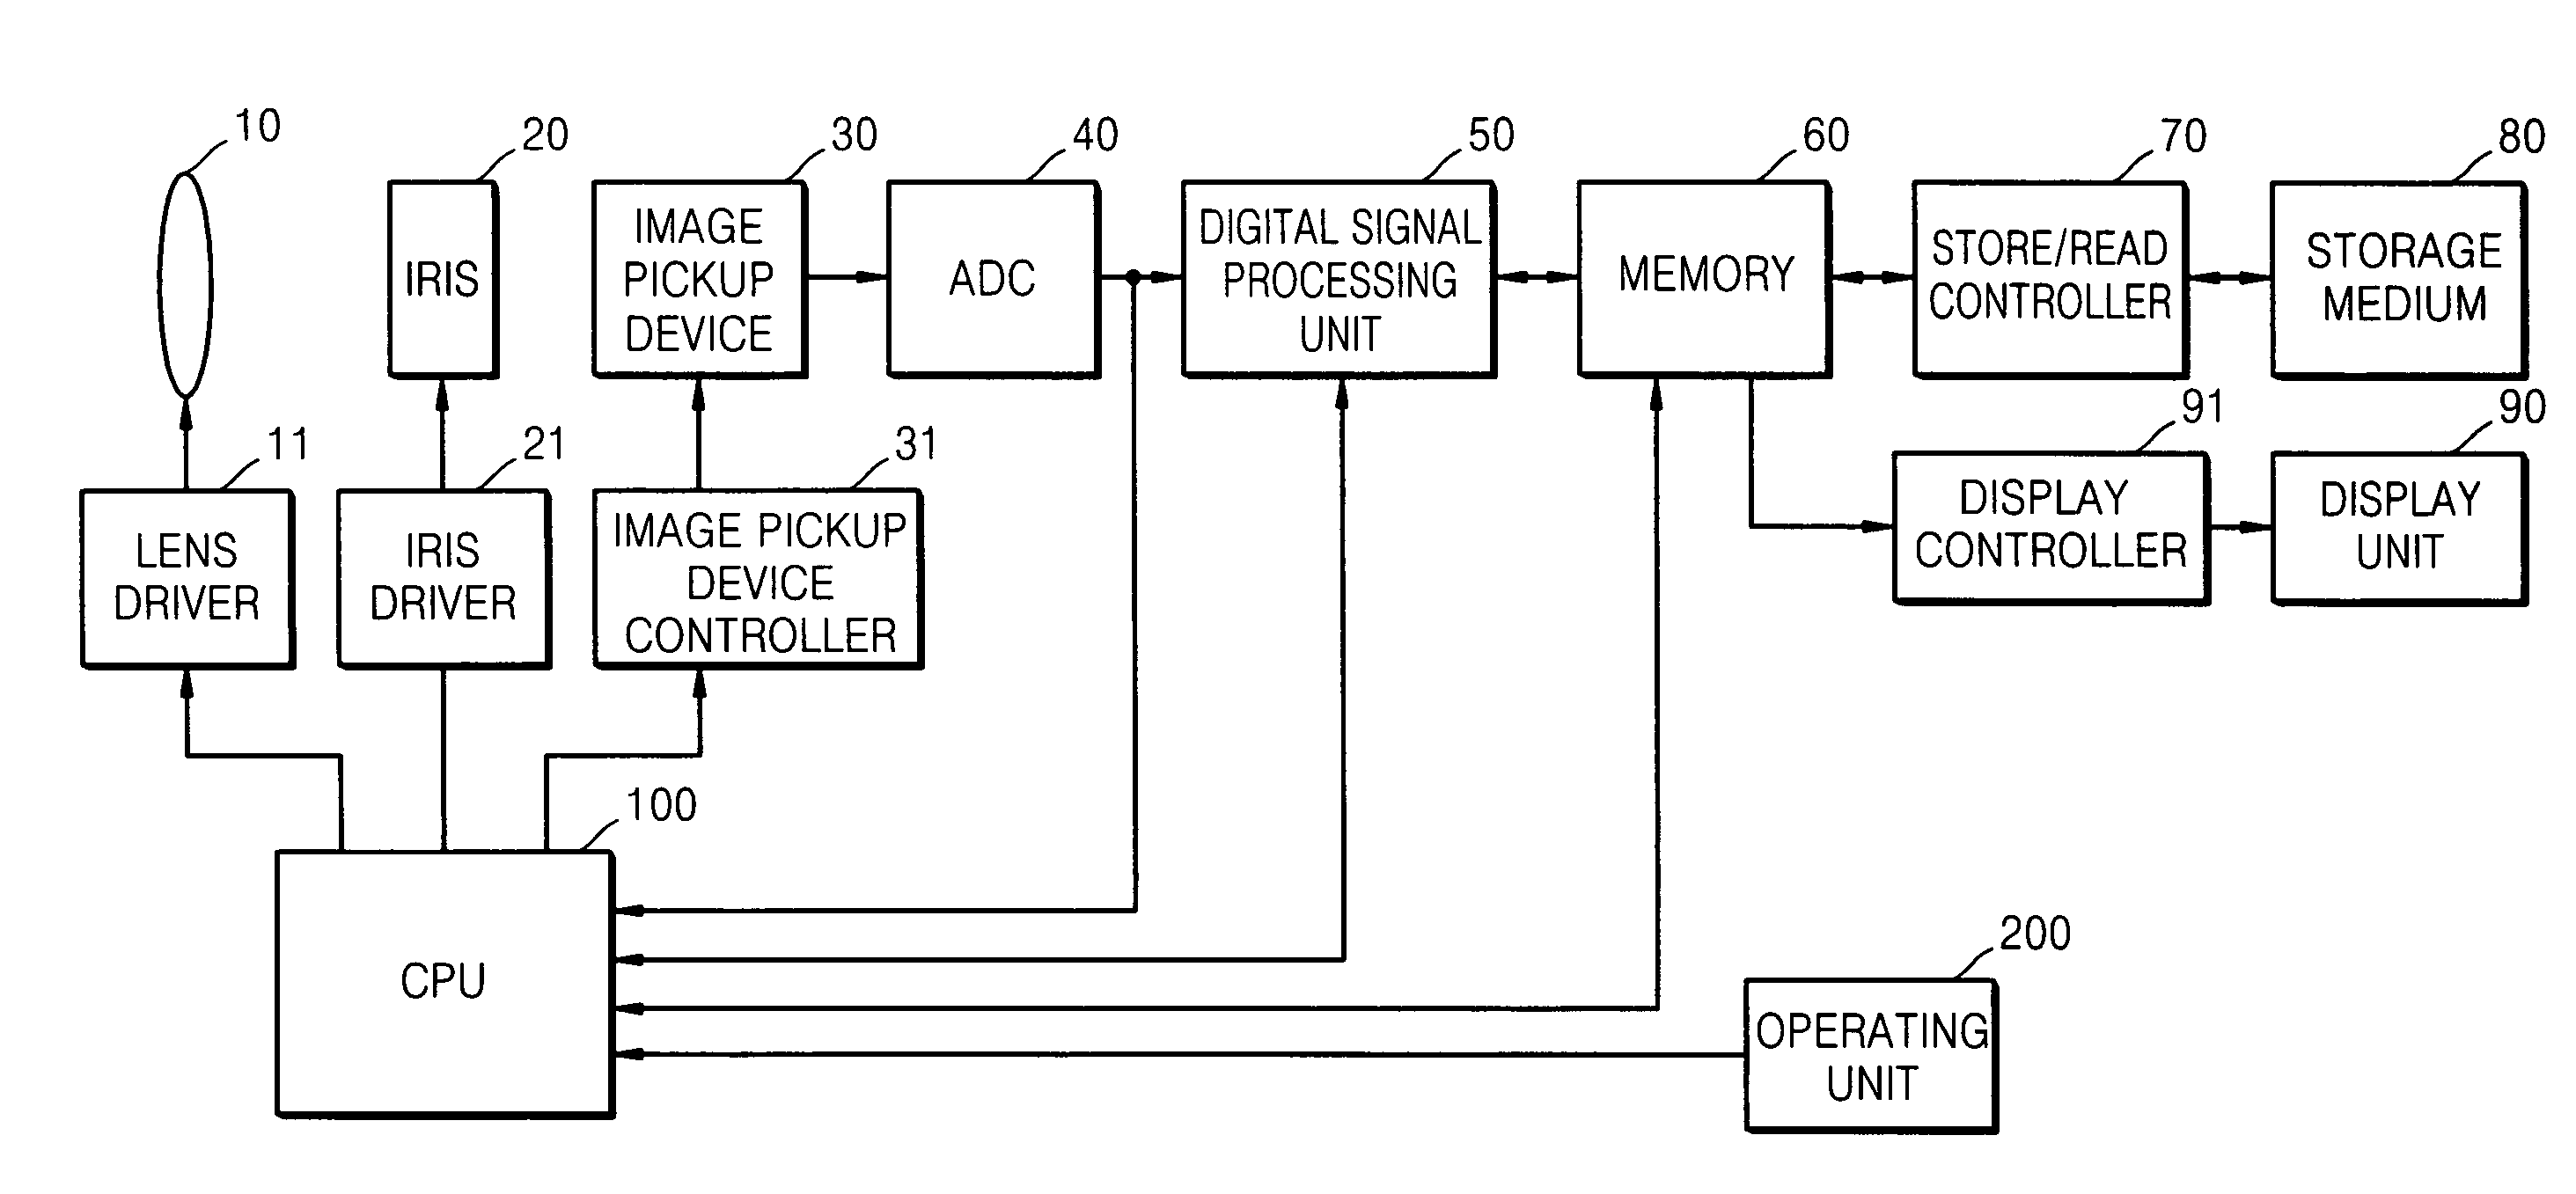 Digital image processing apparatus, method of controlling the same, and recording medium for storing program for executing the method